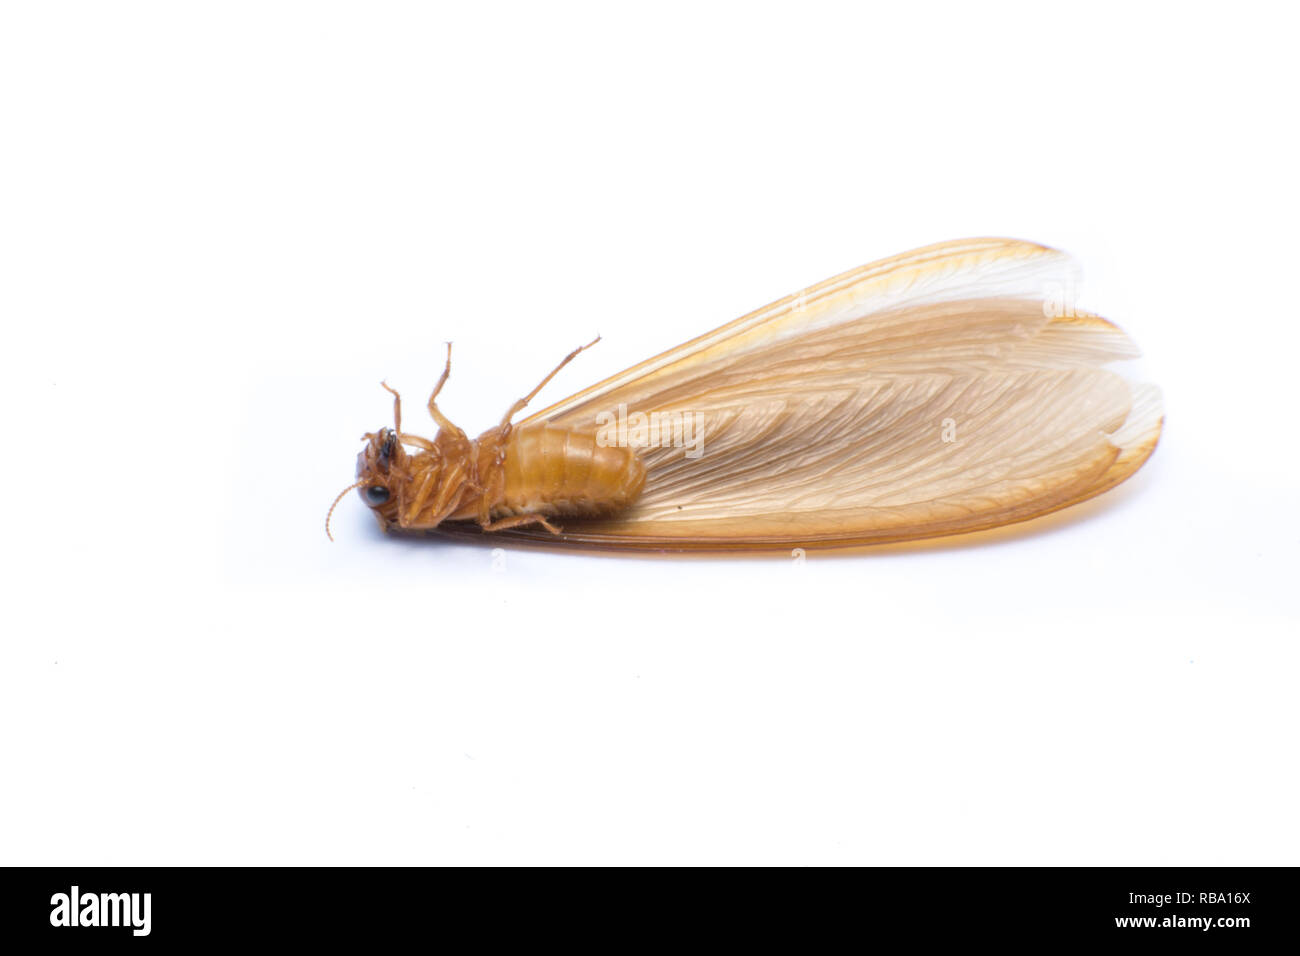 flying termite or Alates isolated on white background. Stock Photo